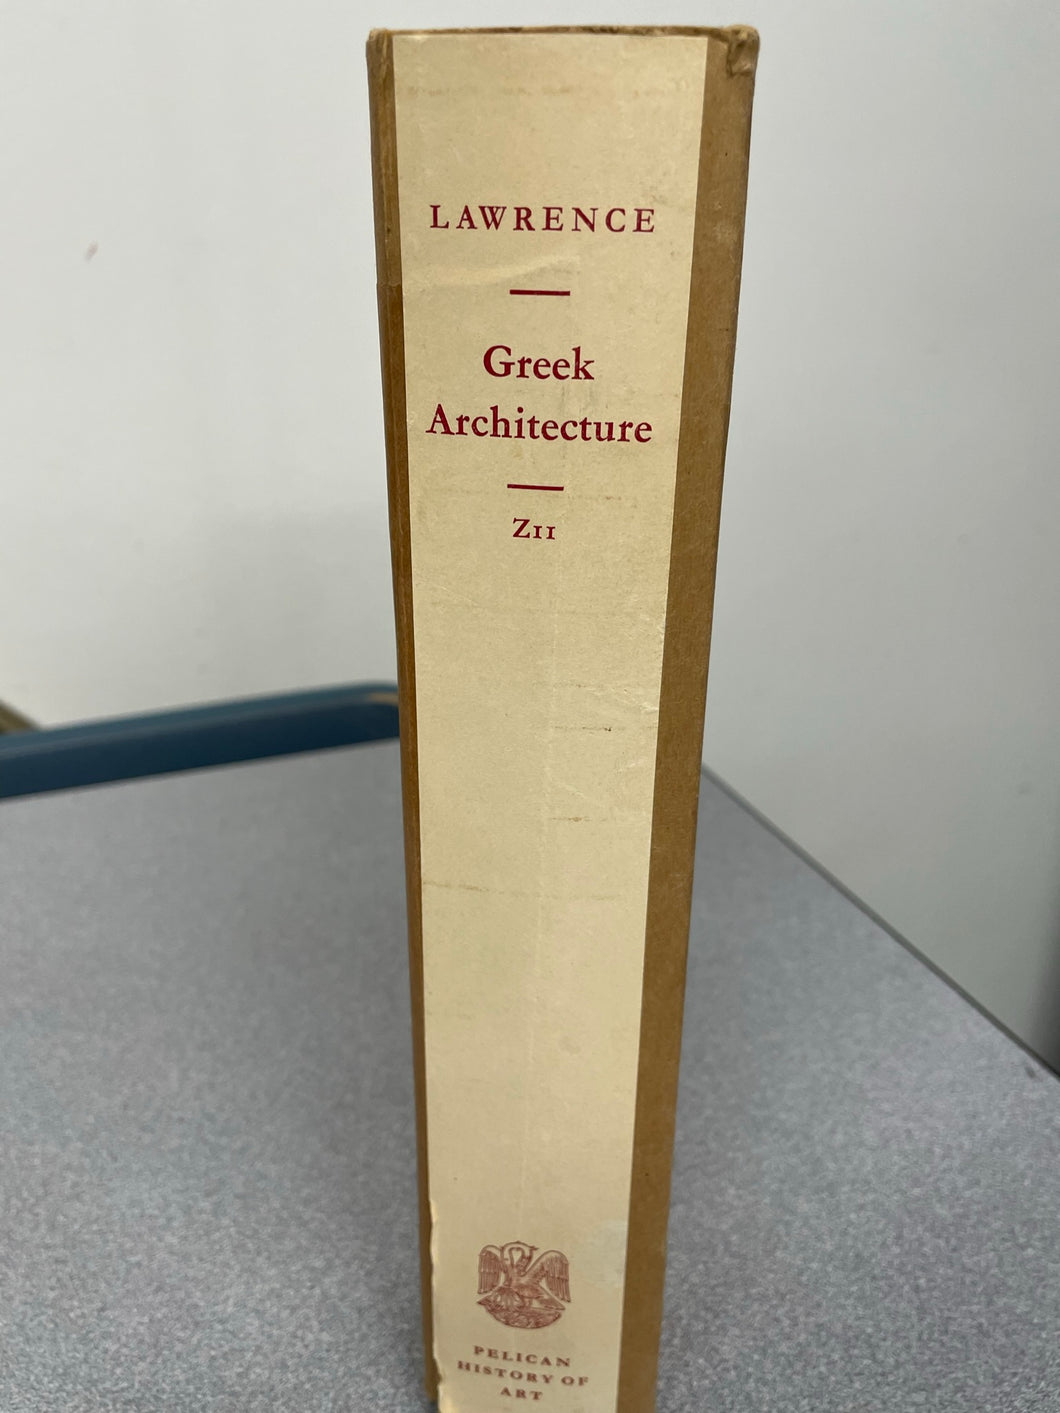 Greek Architecture: The Pelican History of Art, Lawrence, A. W. [1962] A 2/23